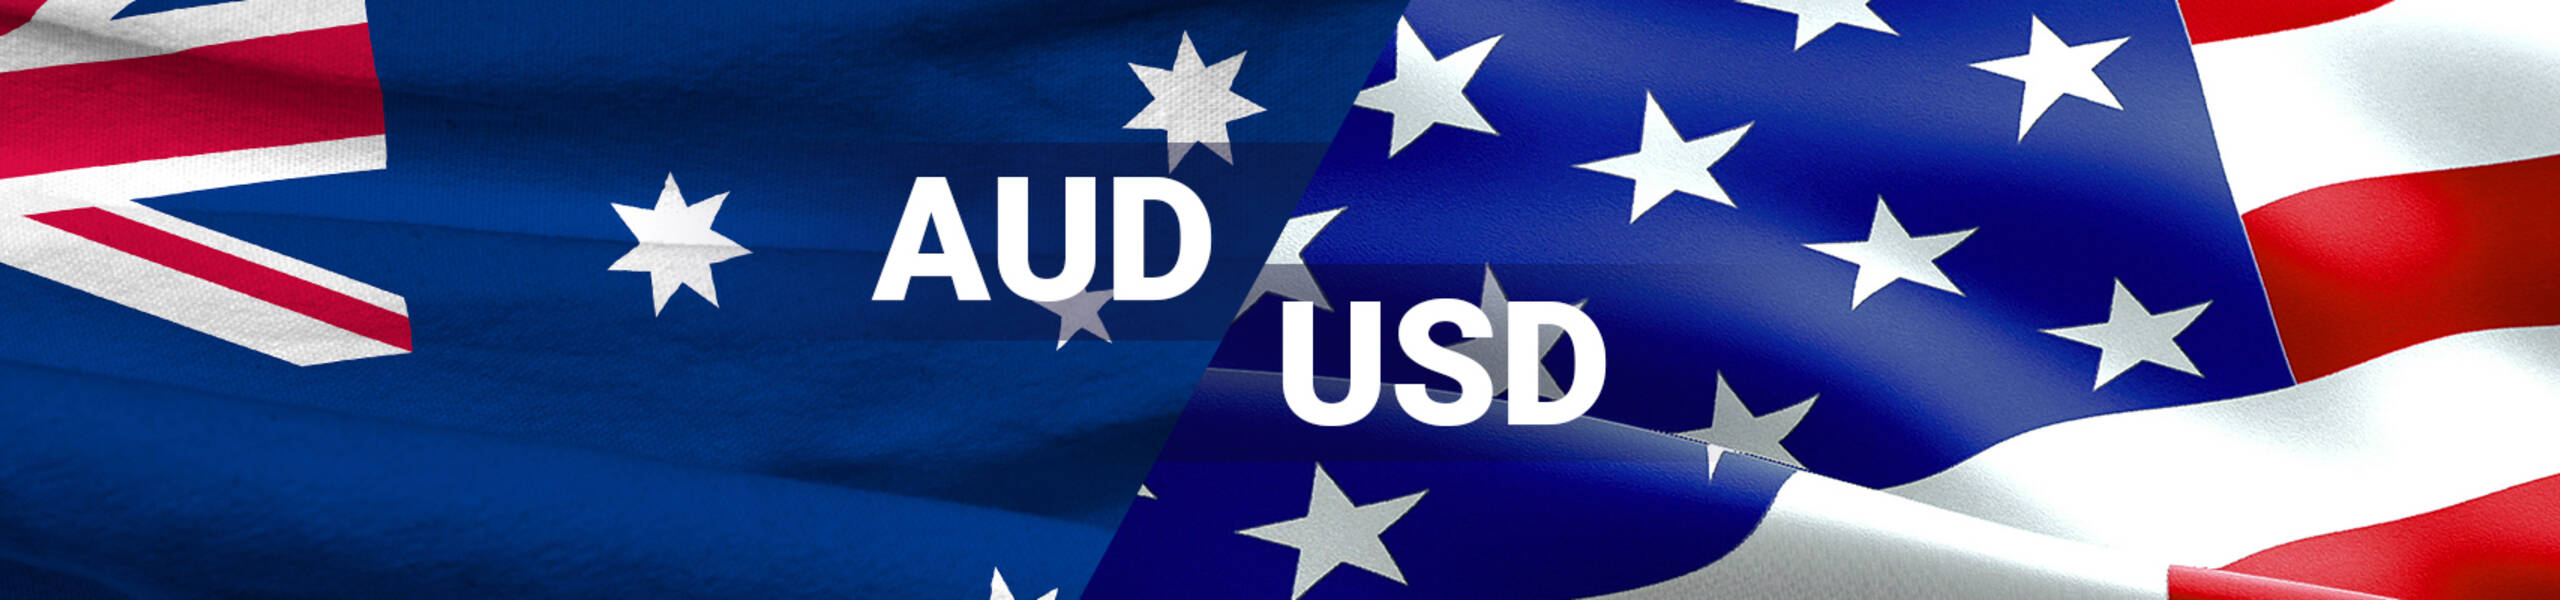 AUD/USD: bulls breaking out Cloud’s resistance